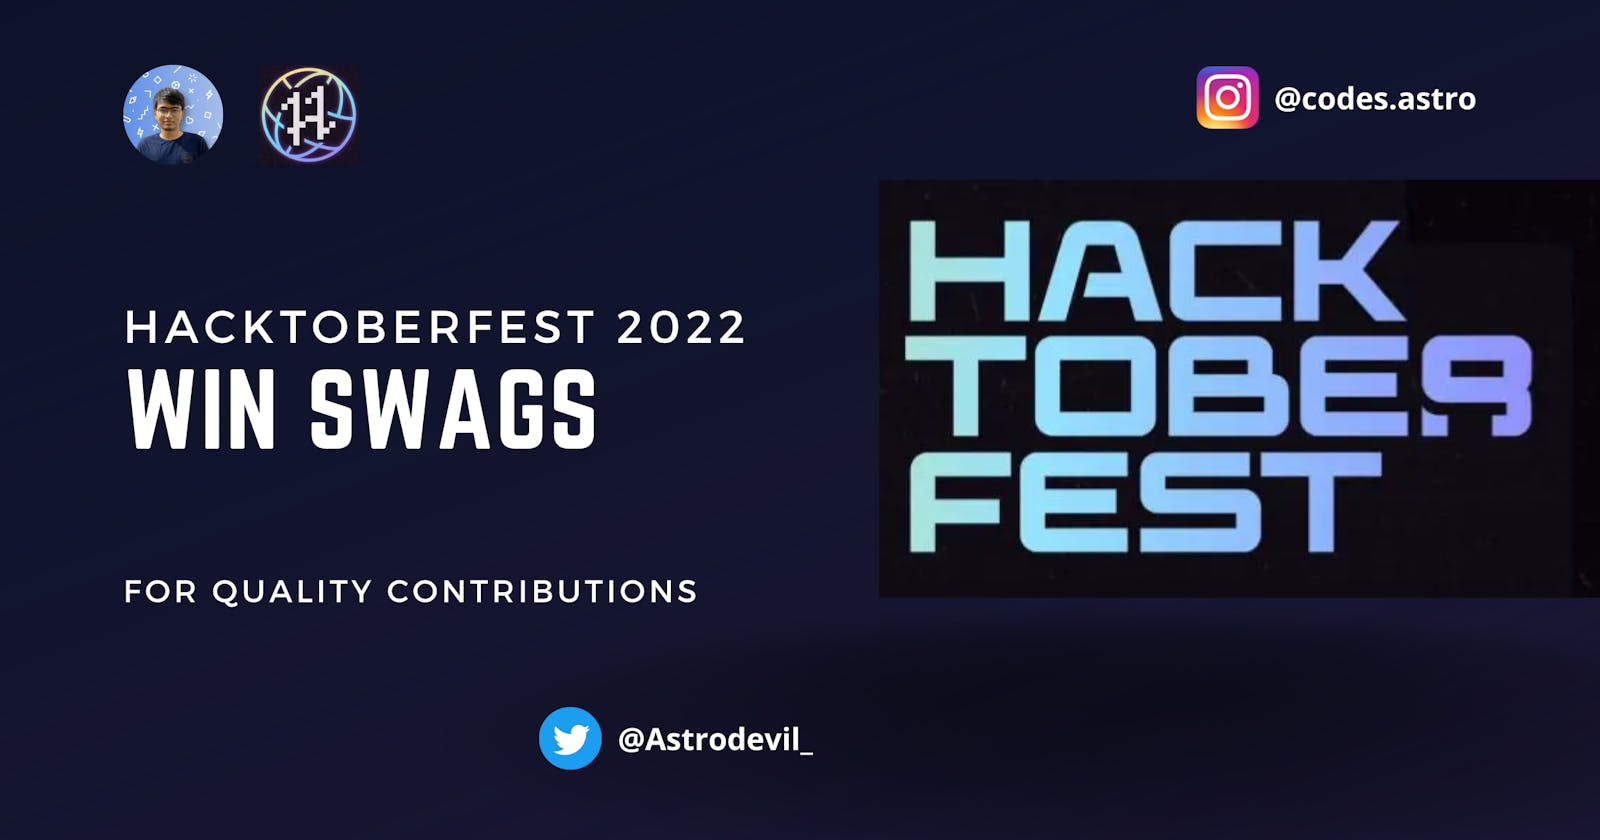 Hacktoberfest 2022: Win Swags for Quality Contributions